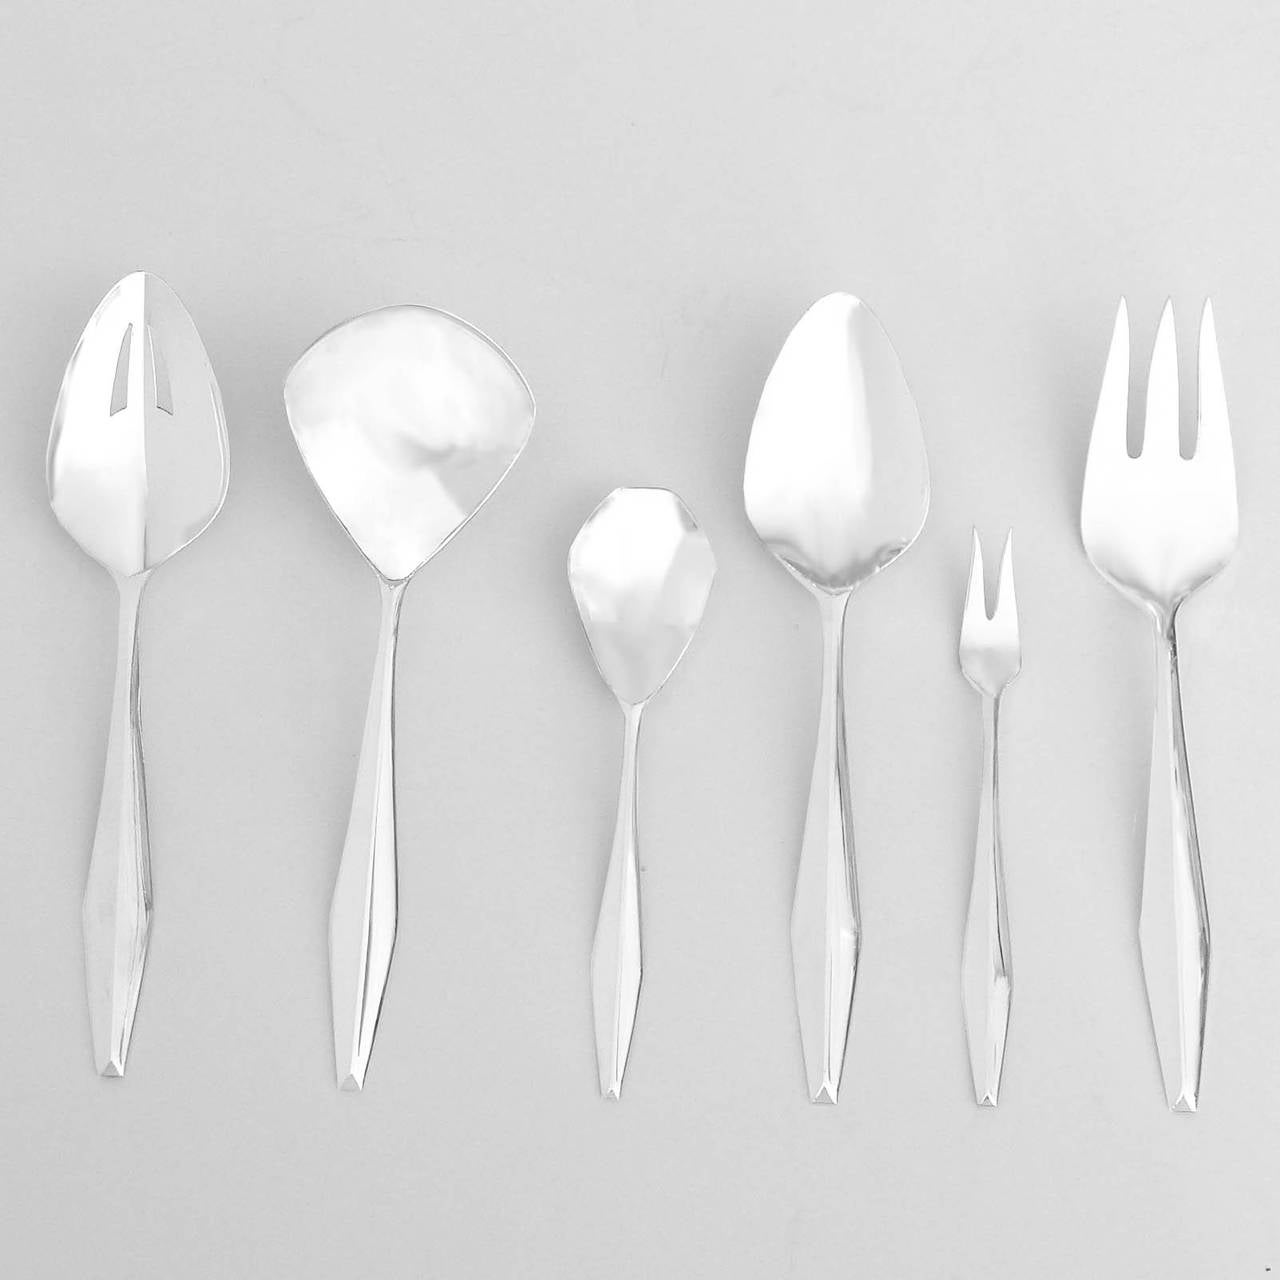 This wonderful sterling silver flatware service was designed by Gio Ponti and produced by Reed and Barton in 1958. There is a complete seven-piece table setting for twelve people plus six beautifully designed serving pieces. Each piece fits